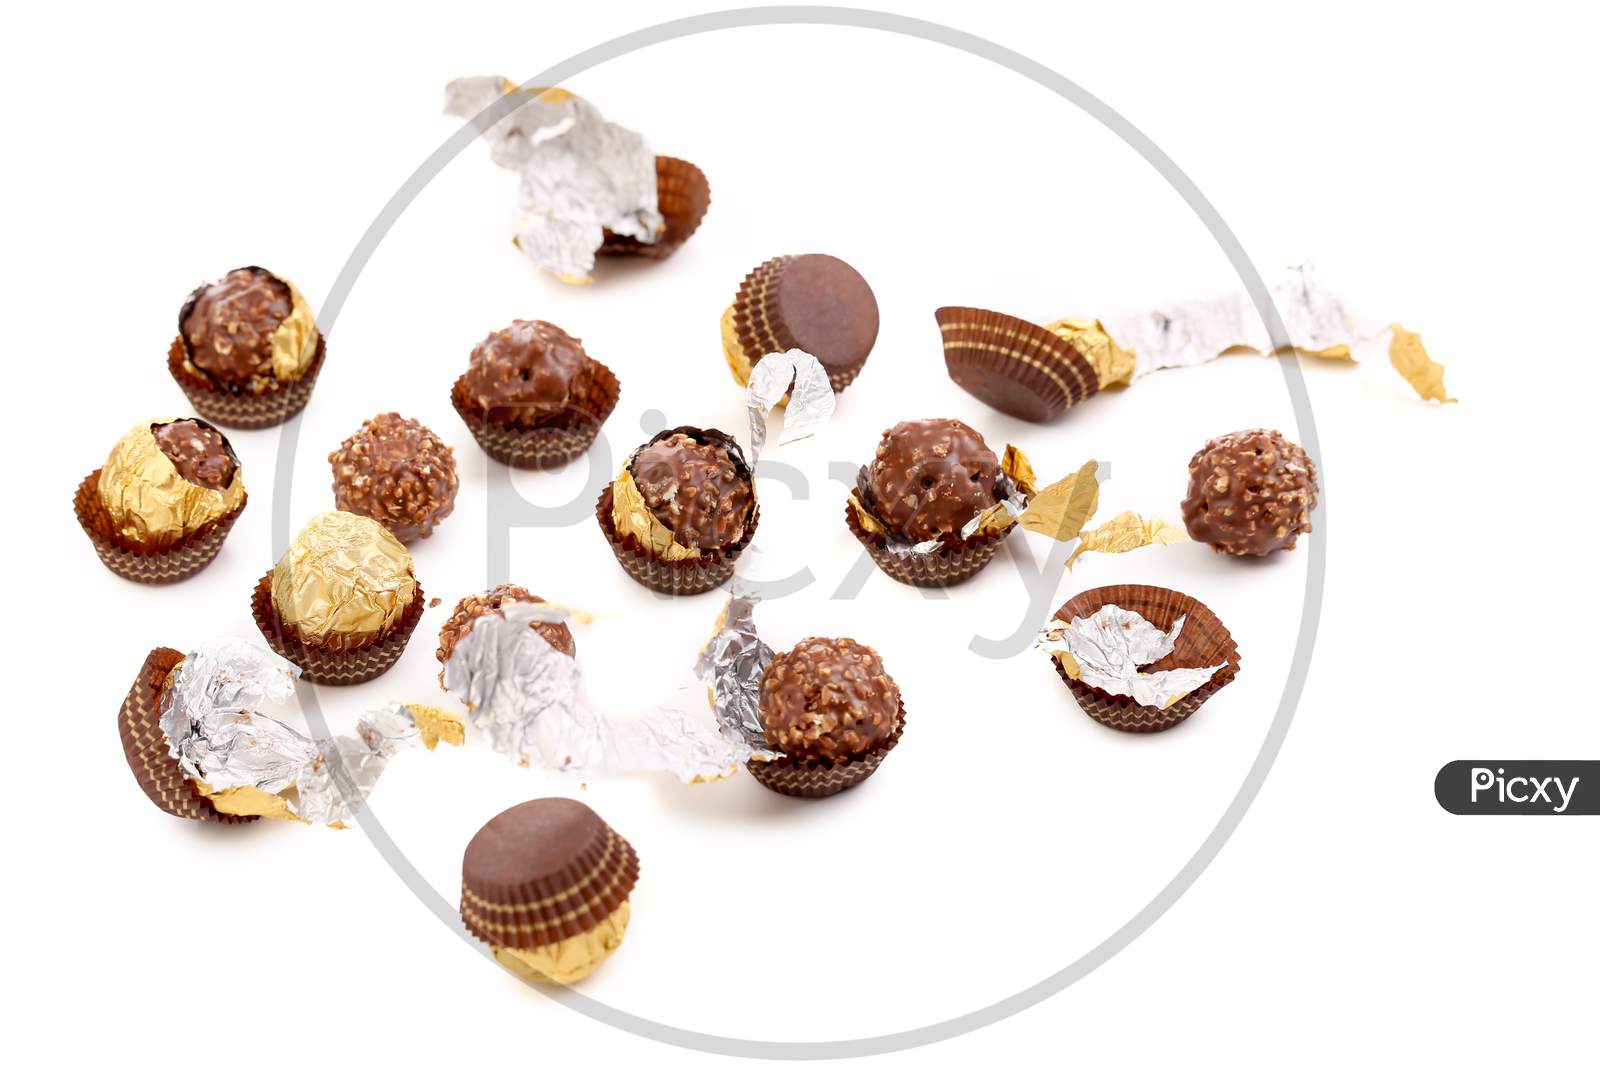 Bunch Of Round Chocolate Bonbons. Isolated On A White Background.